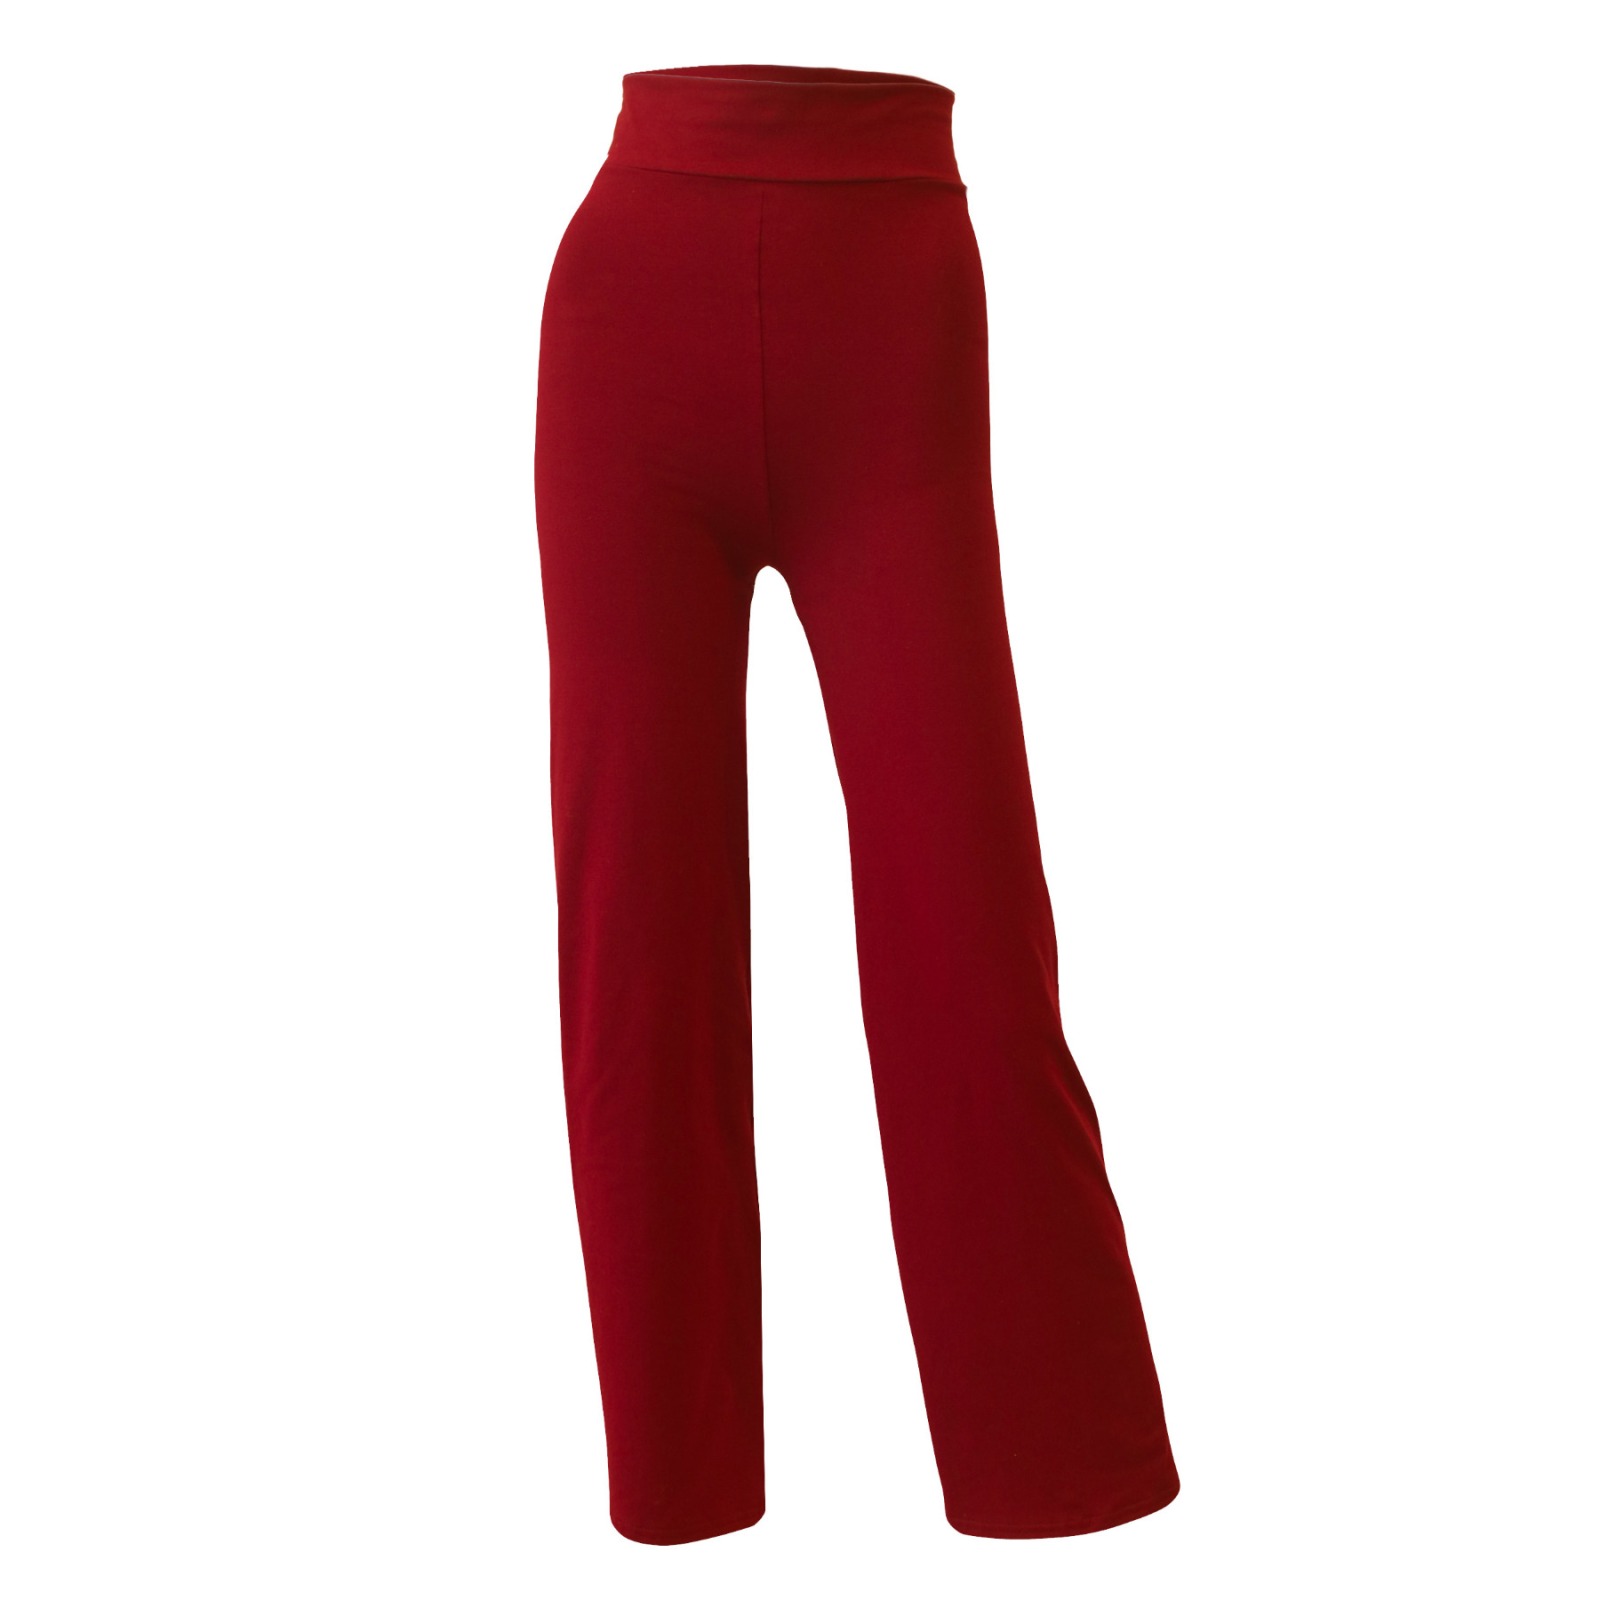 Yogahose Relaxed Fit chili rot